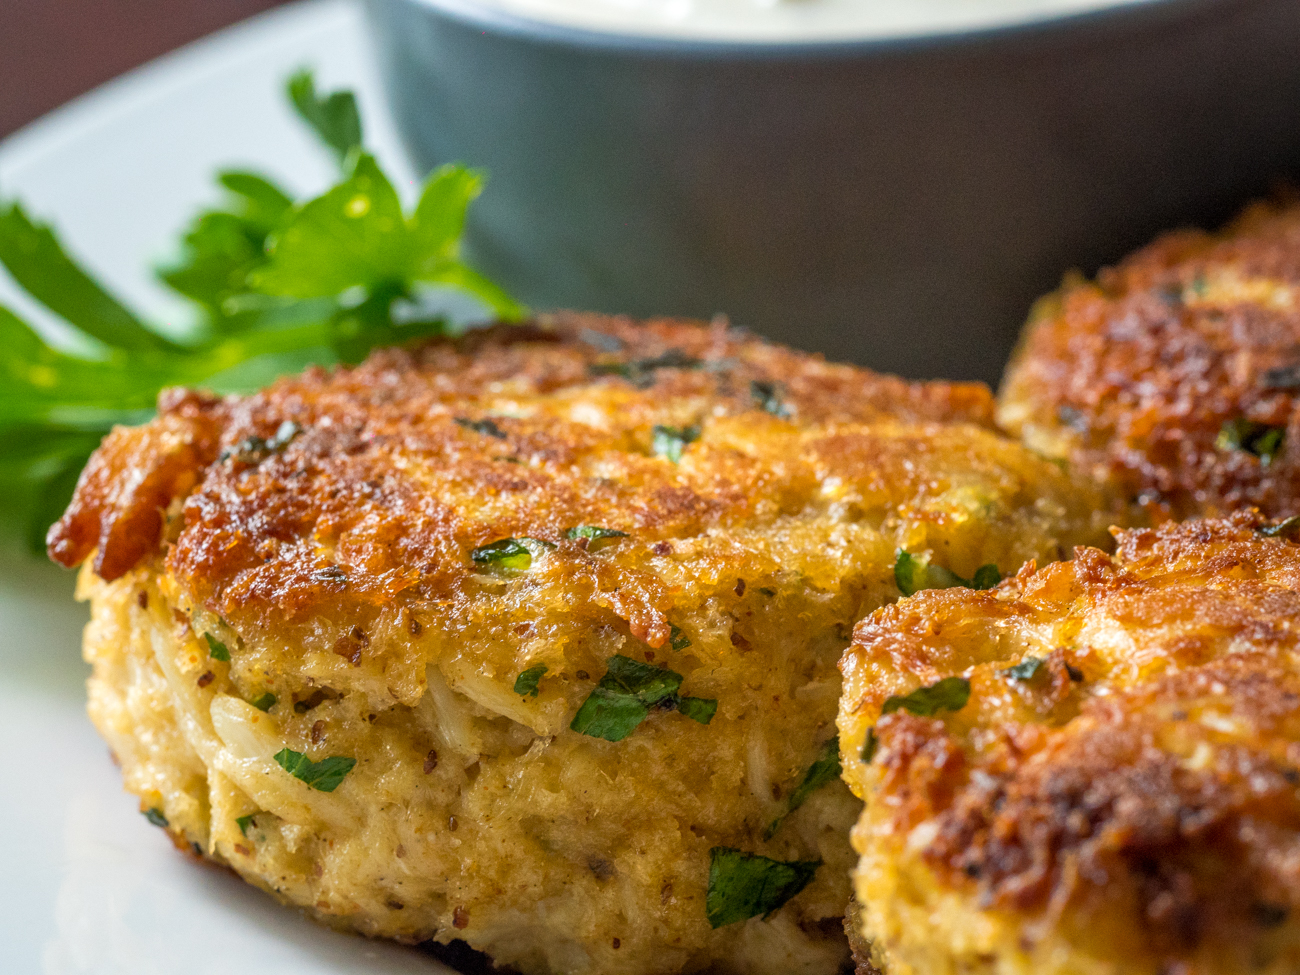 Buy Maryland Crab Cakes Online | Shipping Crab Cakes | Order Crabcakes  Online - Fresh Not Frozen - Crab Cake Express